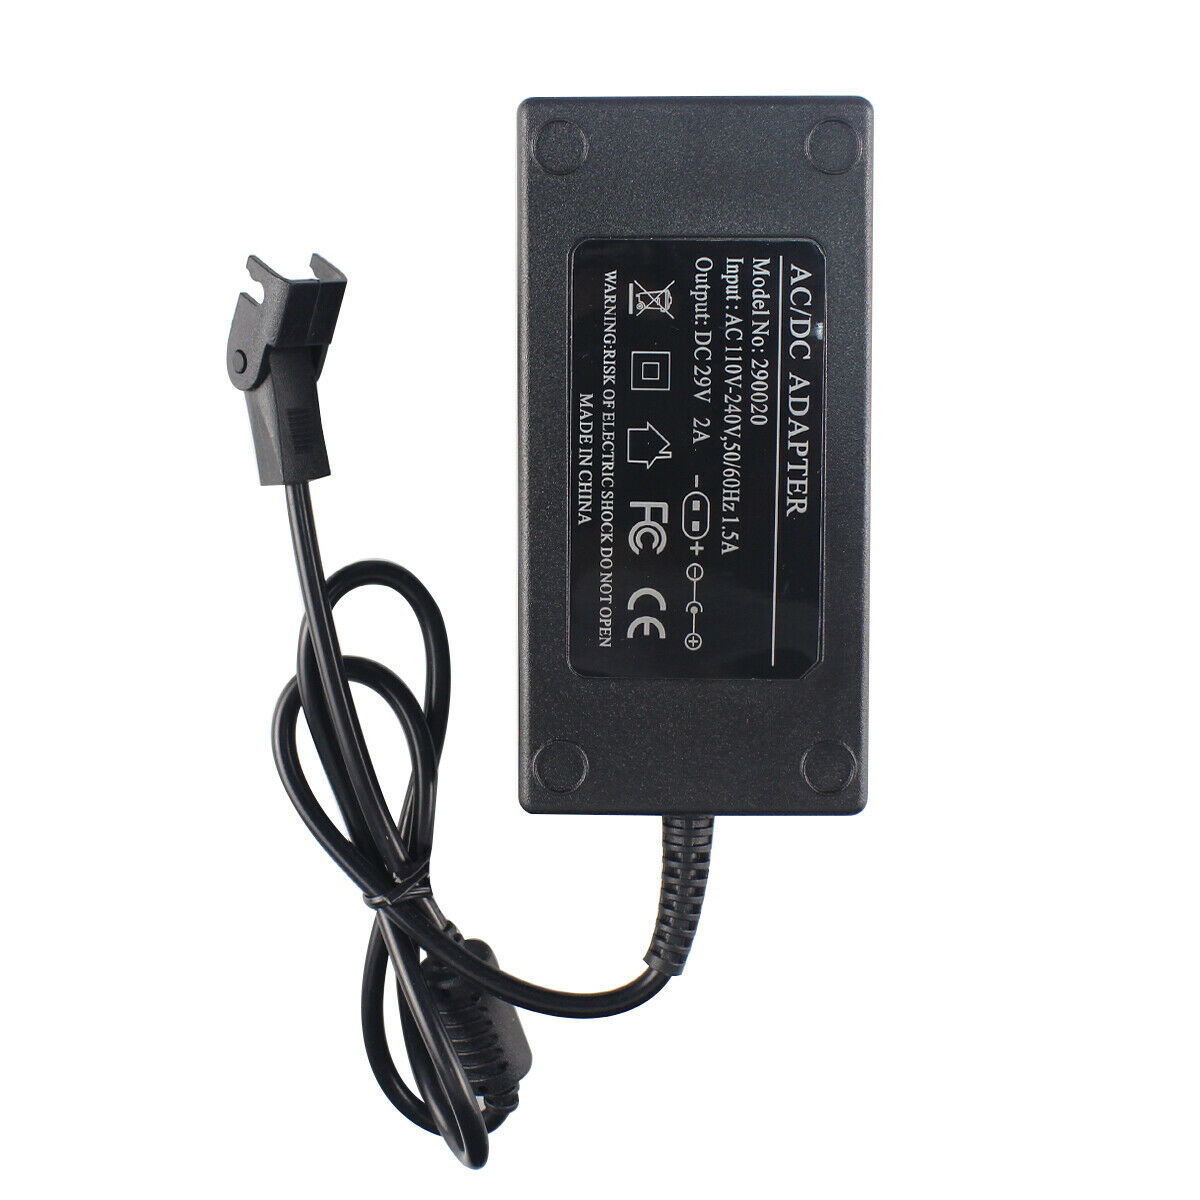 Power Supply Recliner Sofa / Chair Adapter Switching Transformer 29V 2A AC/DC Country/Region of Manufacture: China MPN